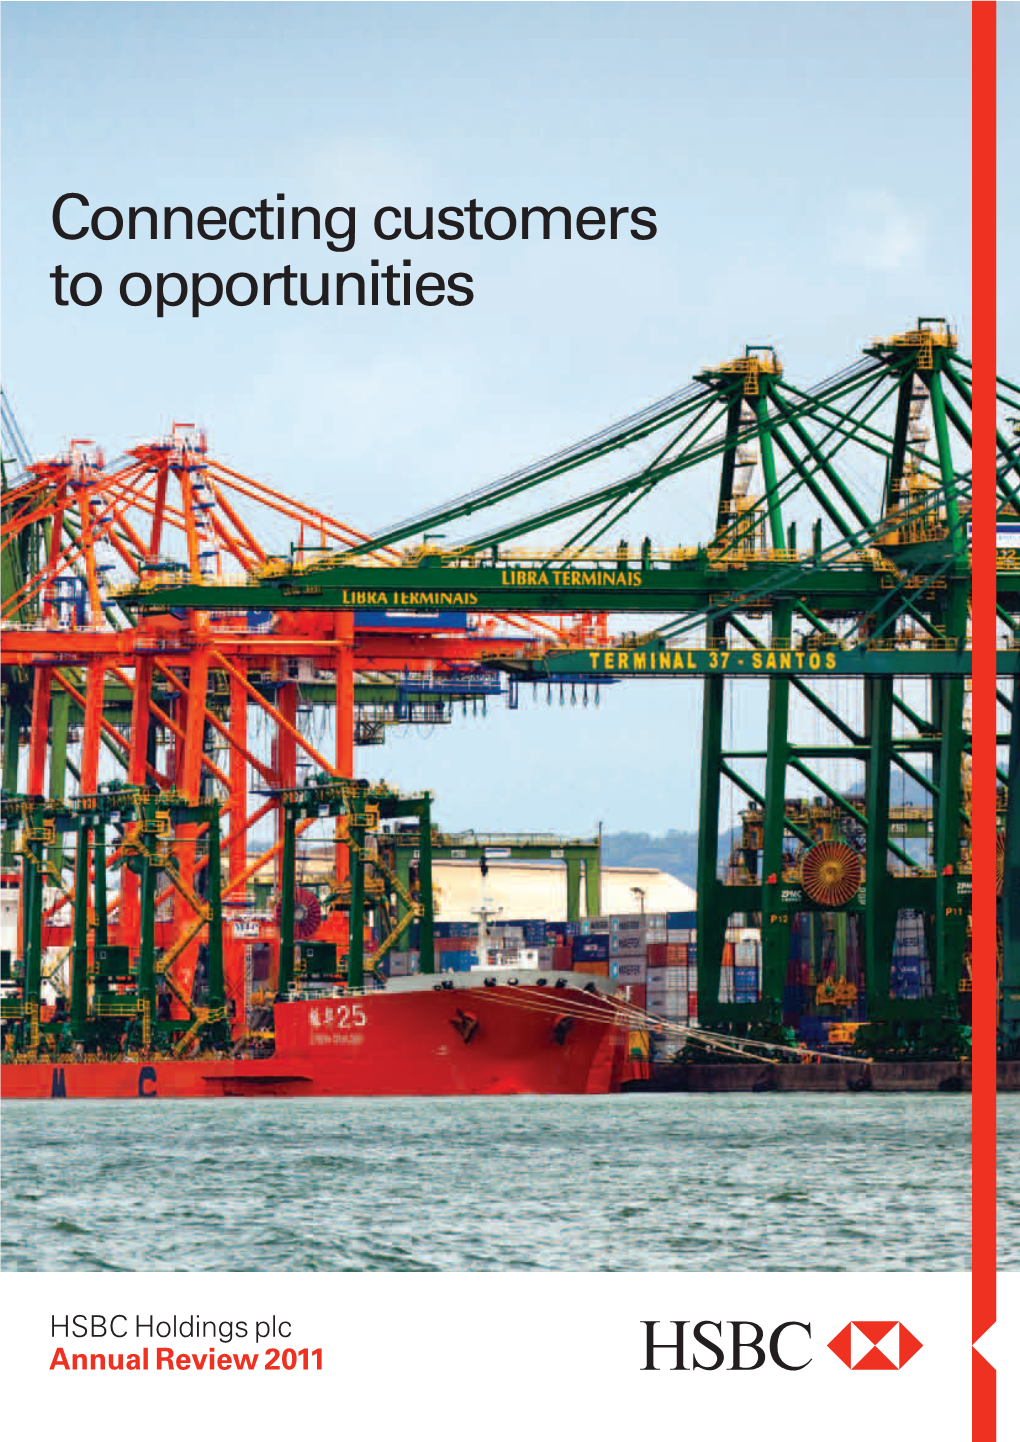 Annual Review 2011 Telephone: 44 020 7991 8888 Who We Are and What We Do Cover Image: ‘Connecting Customers to Opportunities’